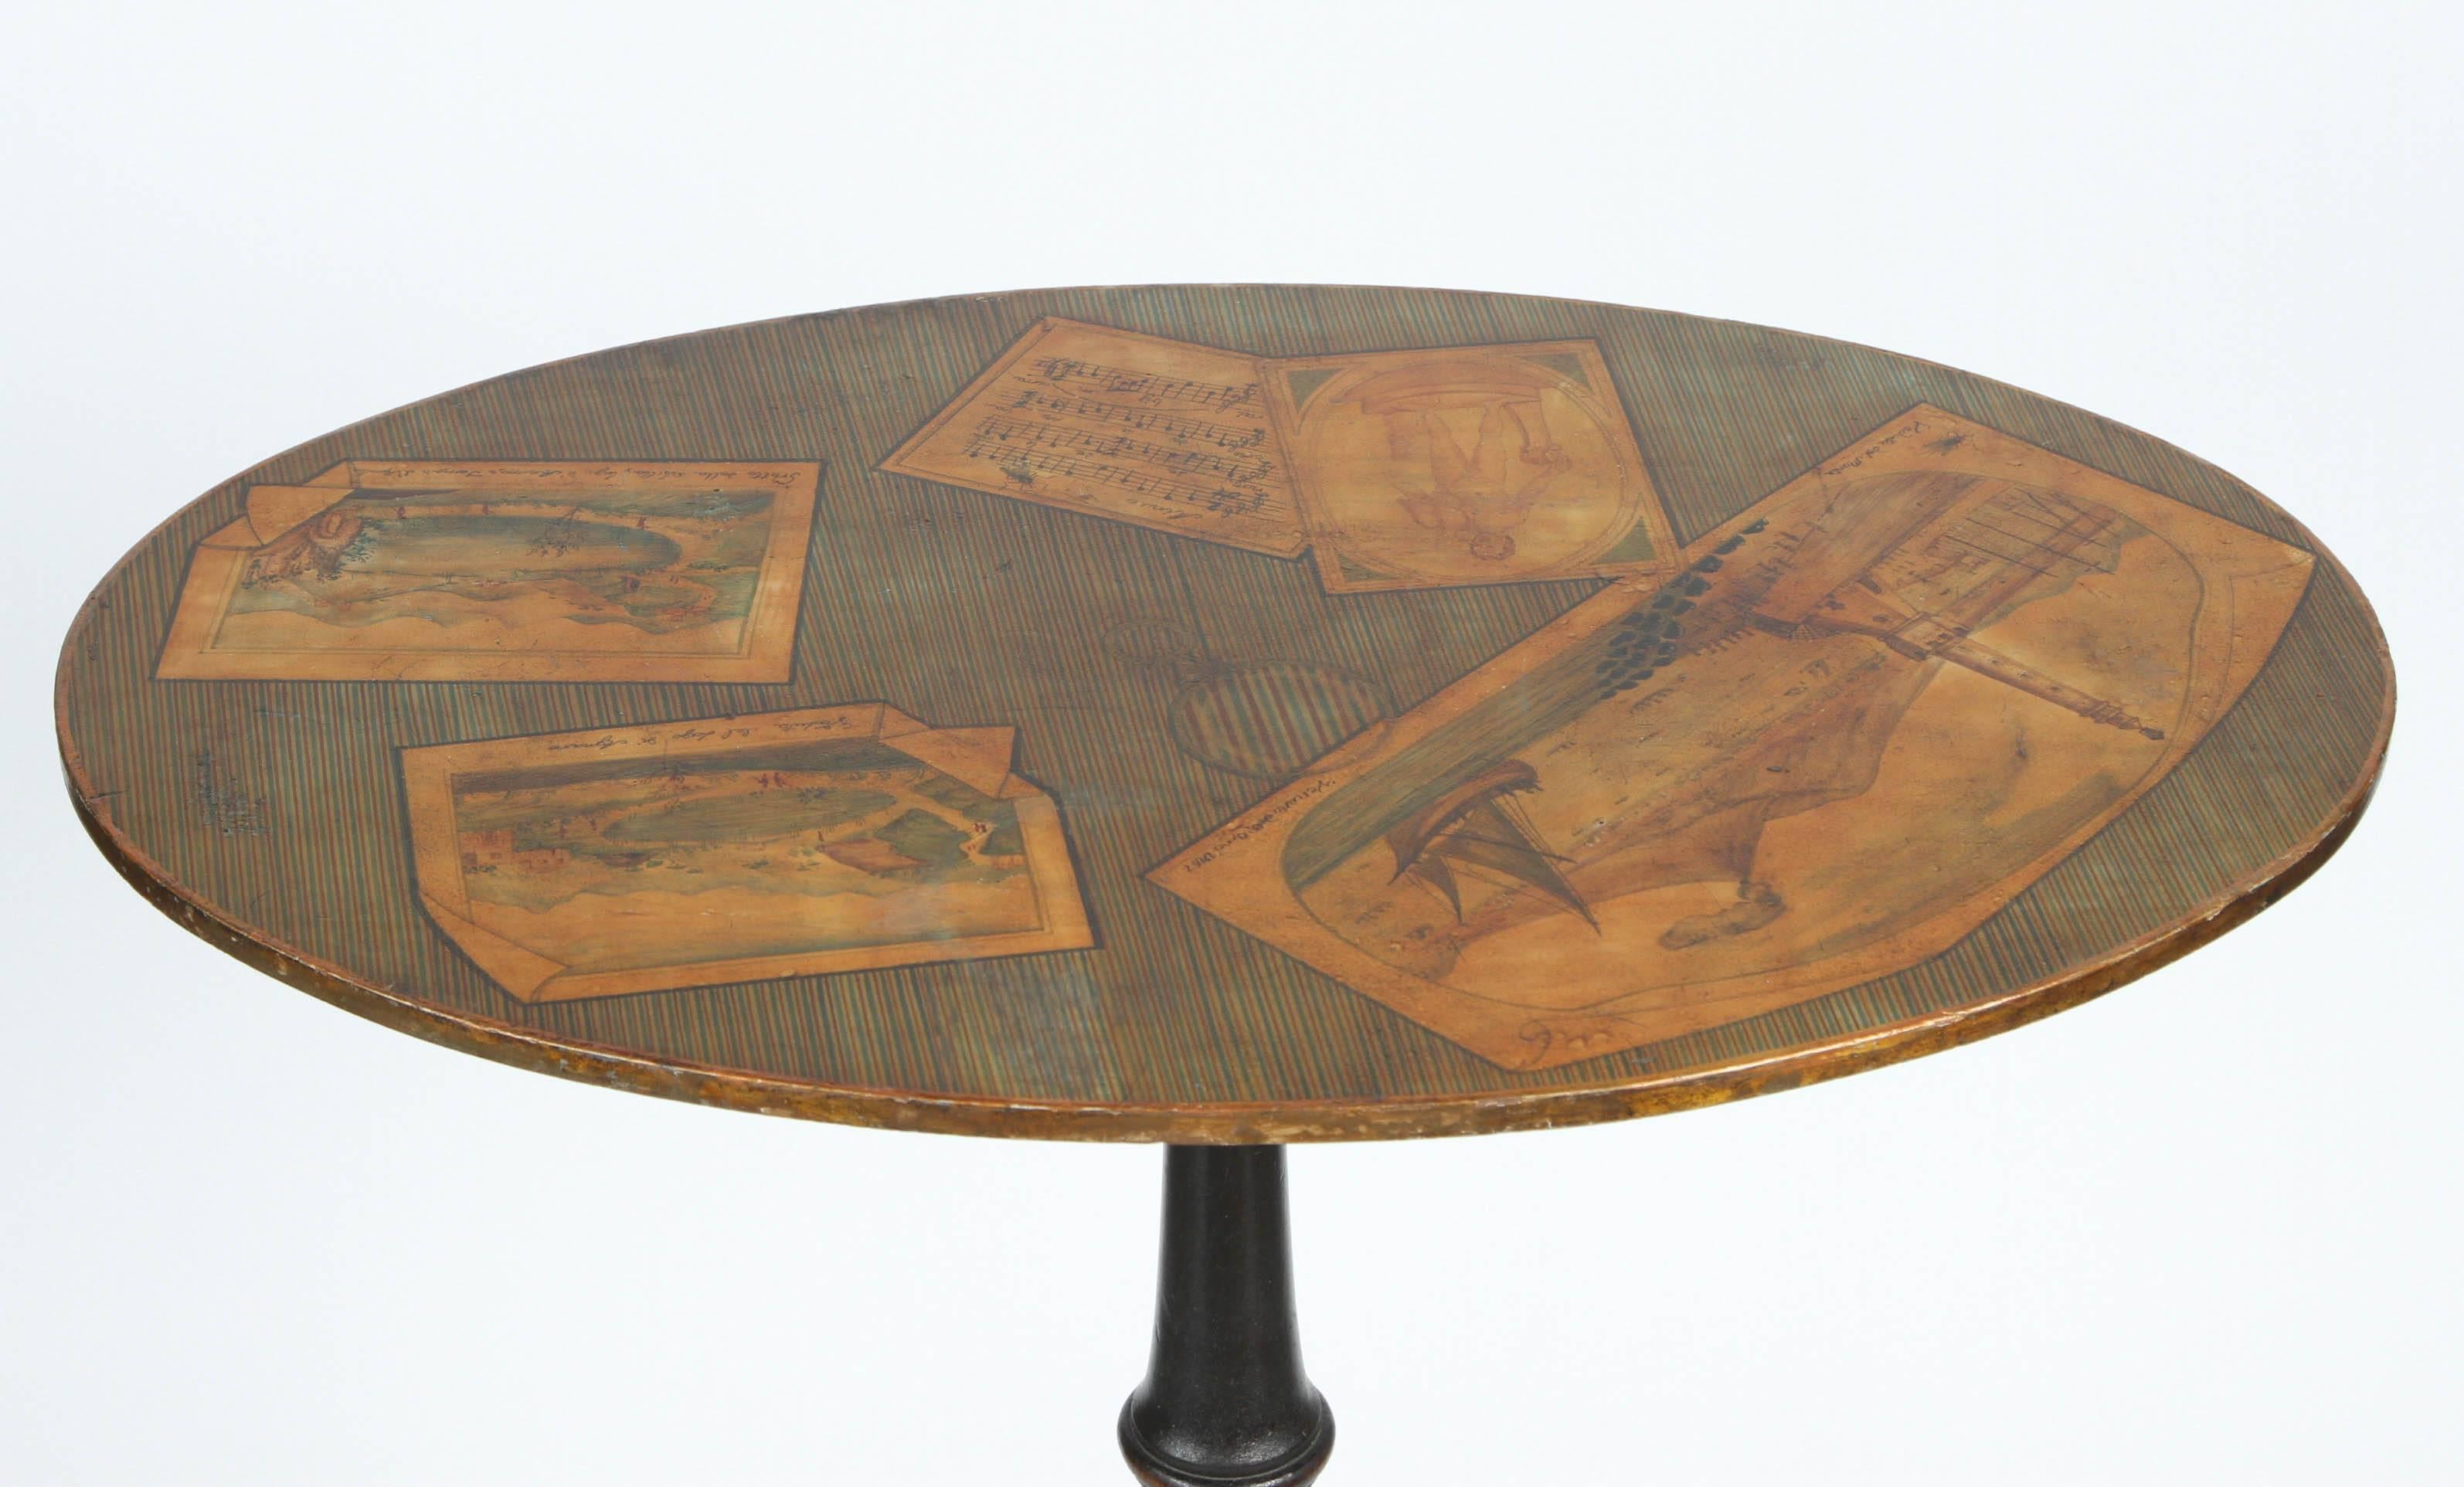 A 19th century English end table with Trompe L'oeil paintings of Italian Grande tour scenes (including Vesuvius erupting) on a tripod base.